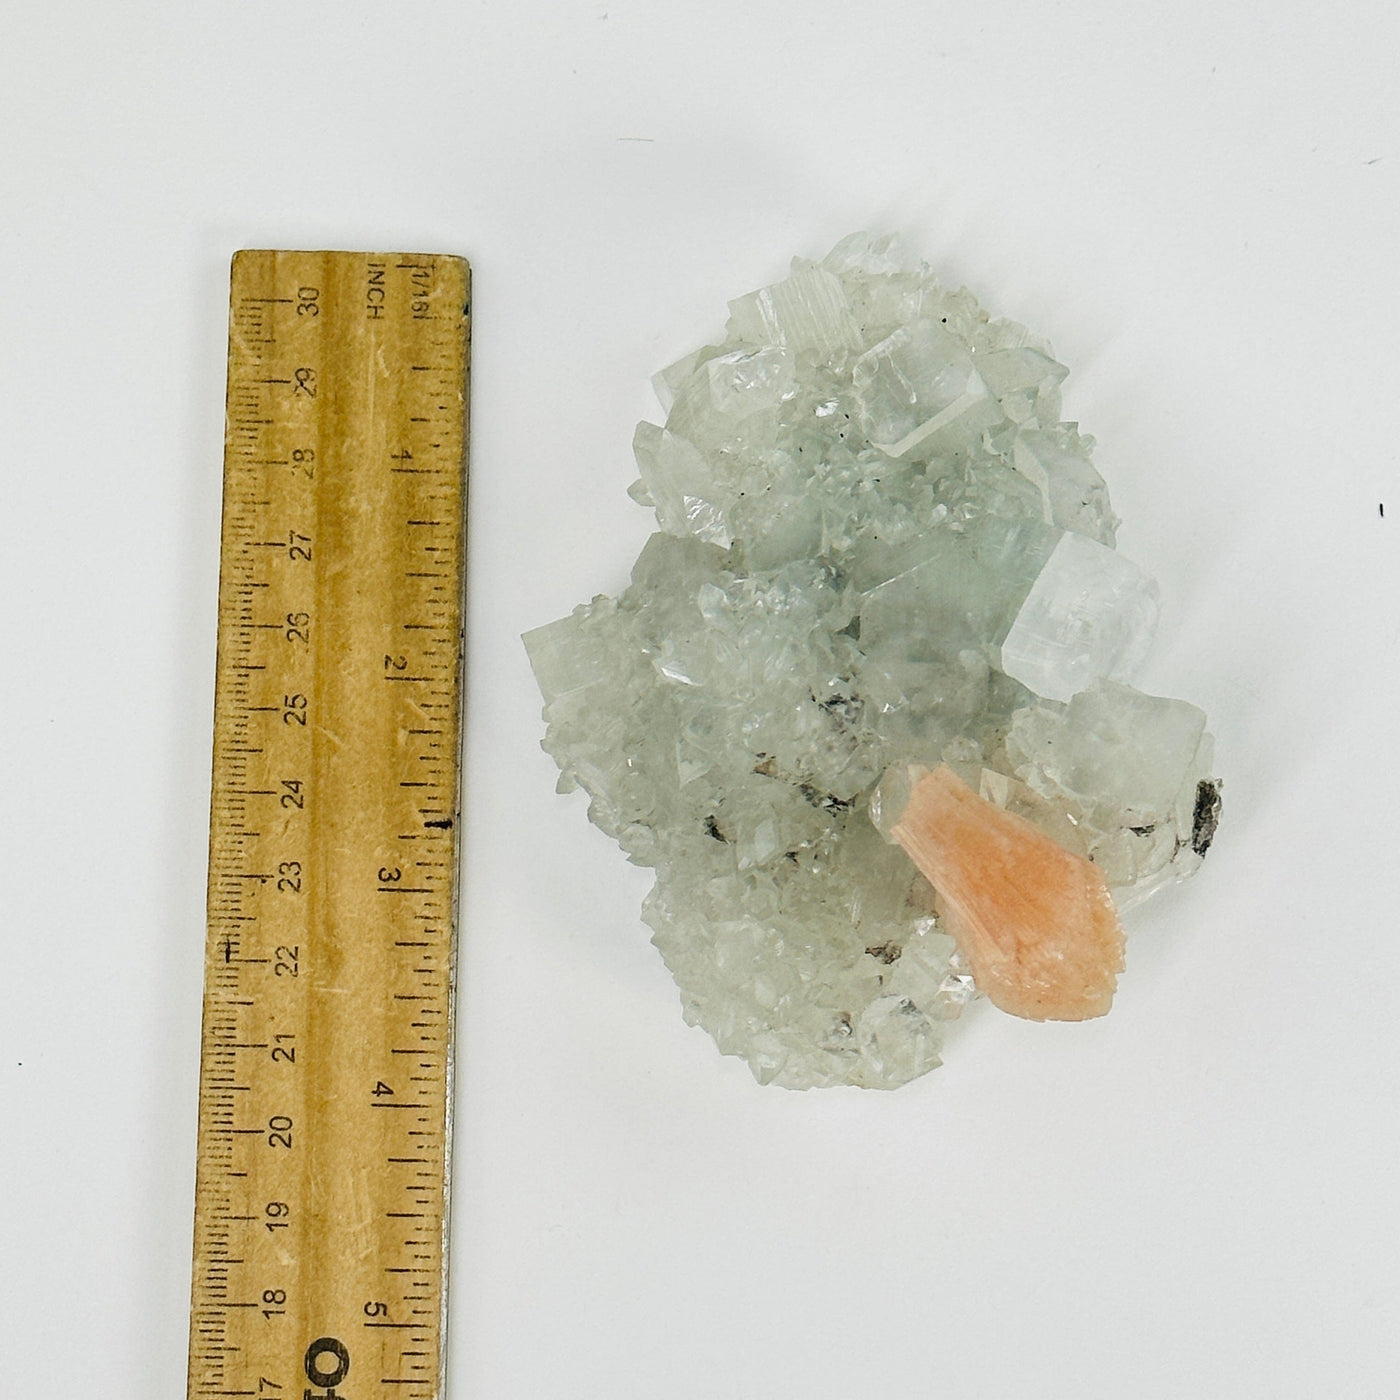 peach apophyllite with Stilbite next to a ruler for size reference